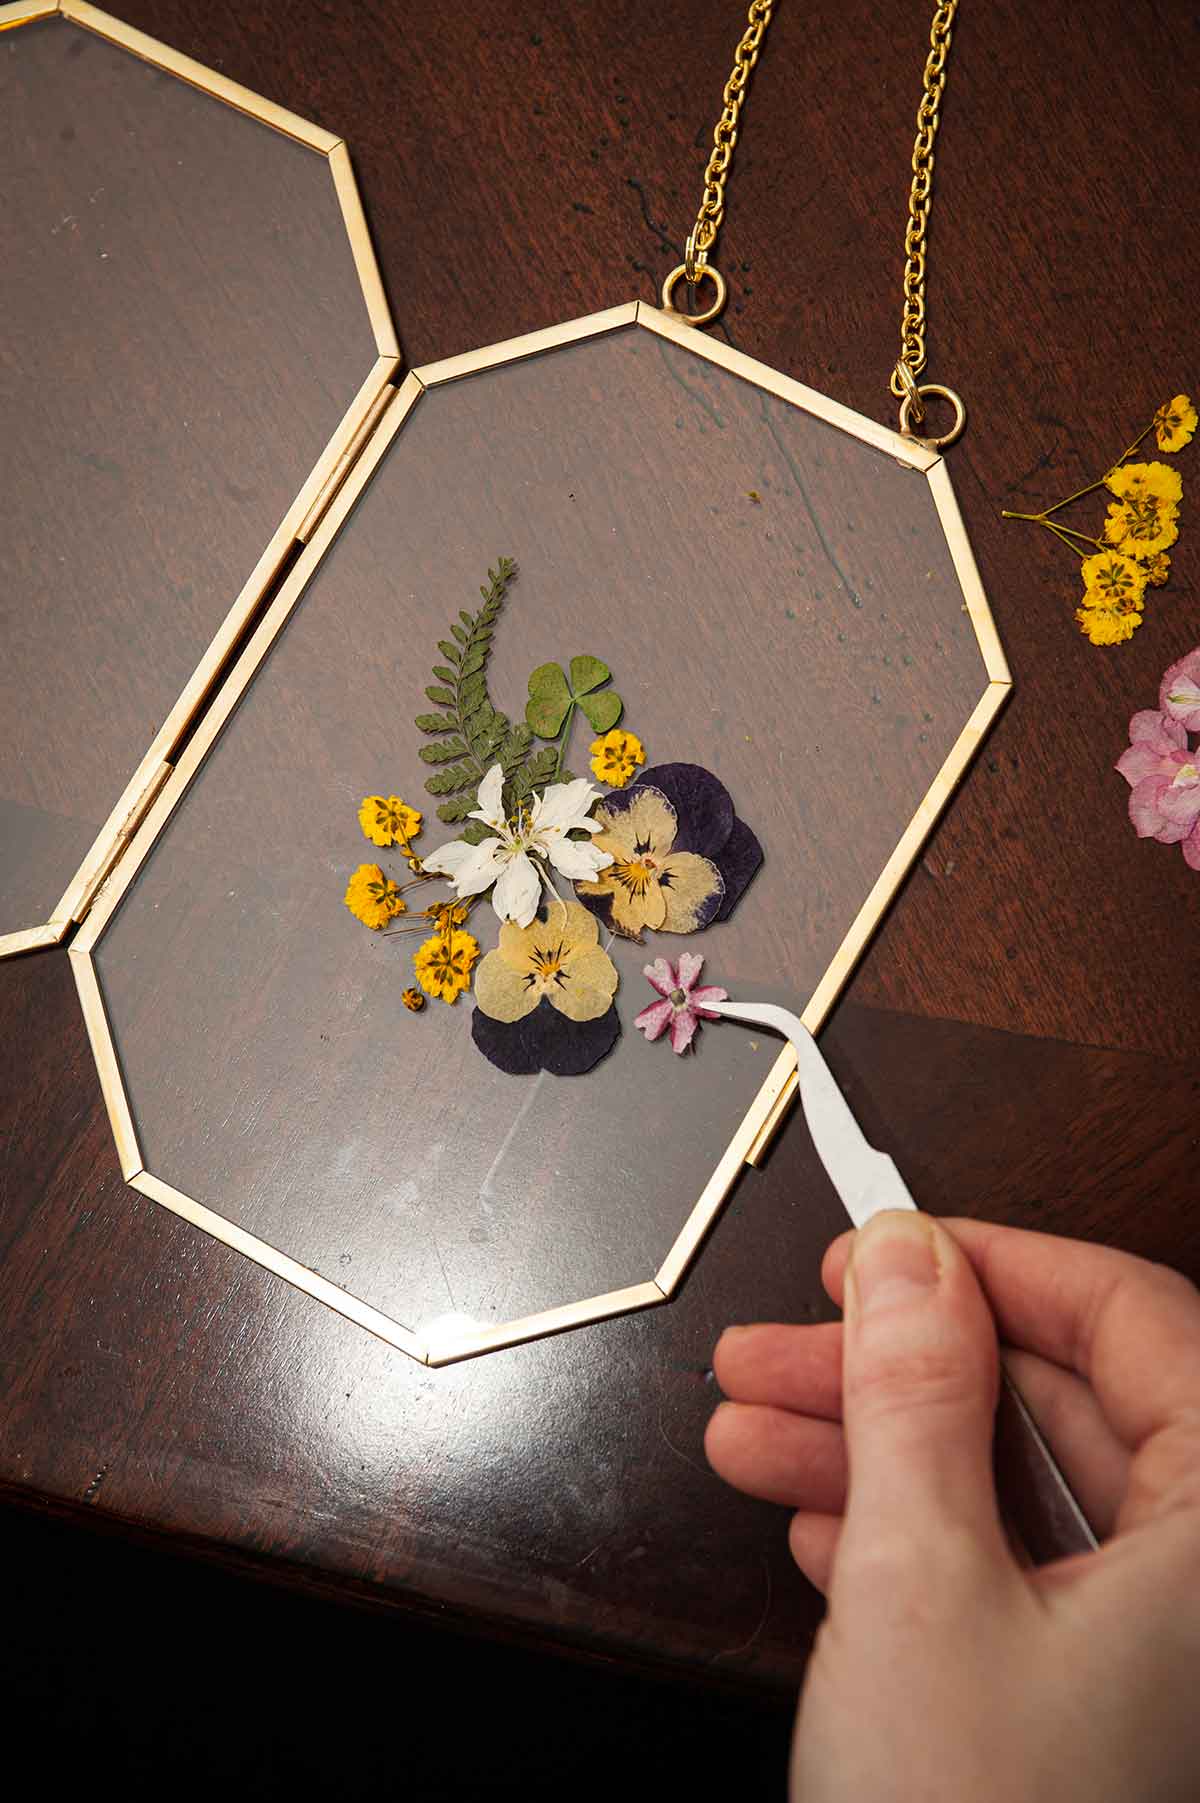 Fingers using tweezers to place flowers on a clear frame.